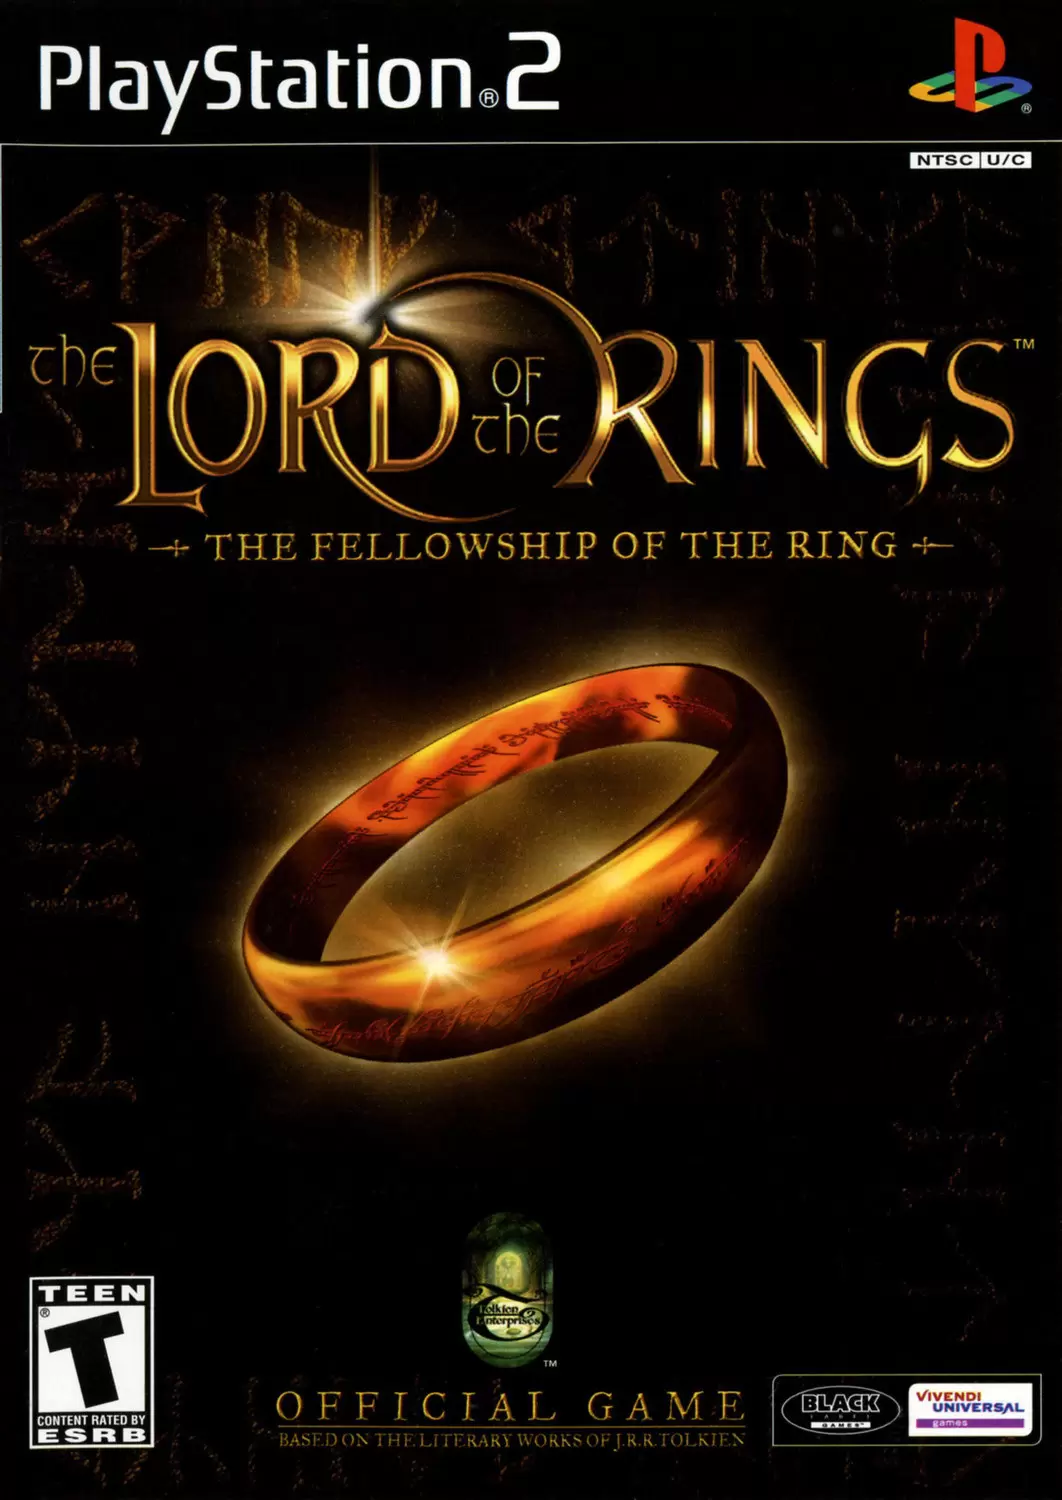 PS2 Games - The Lord of the Rings: The Fellowship of the Ring